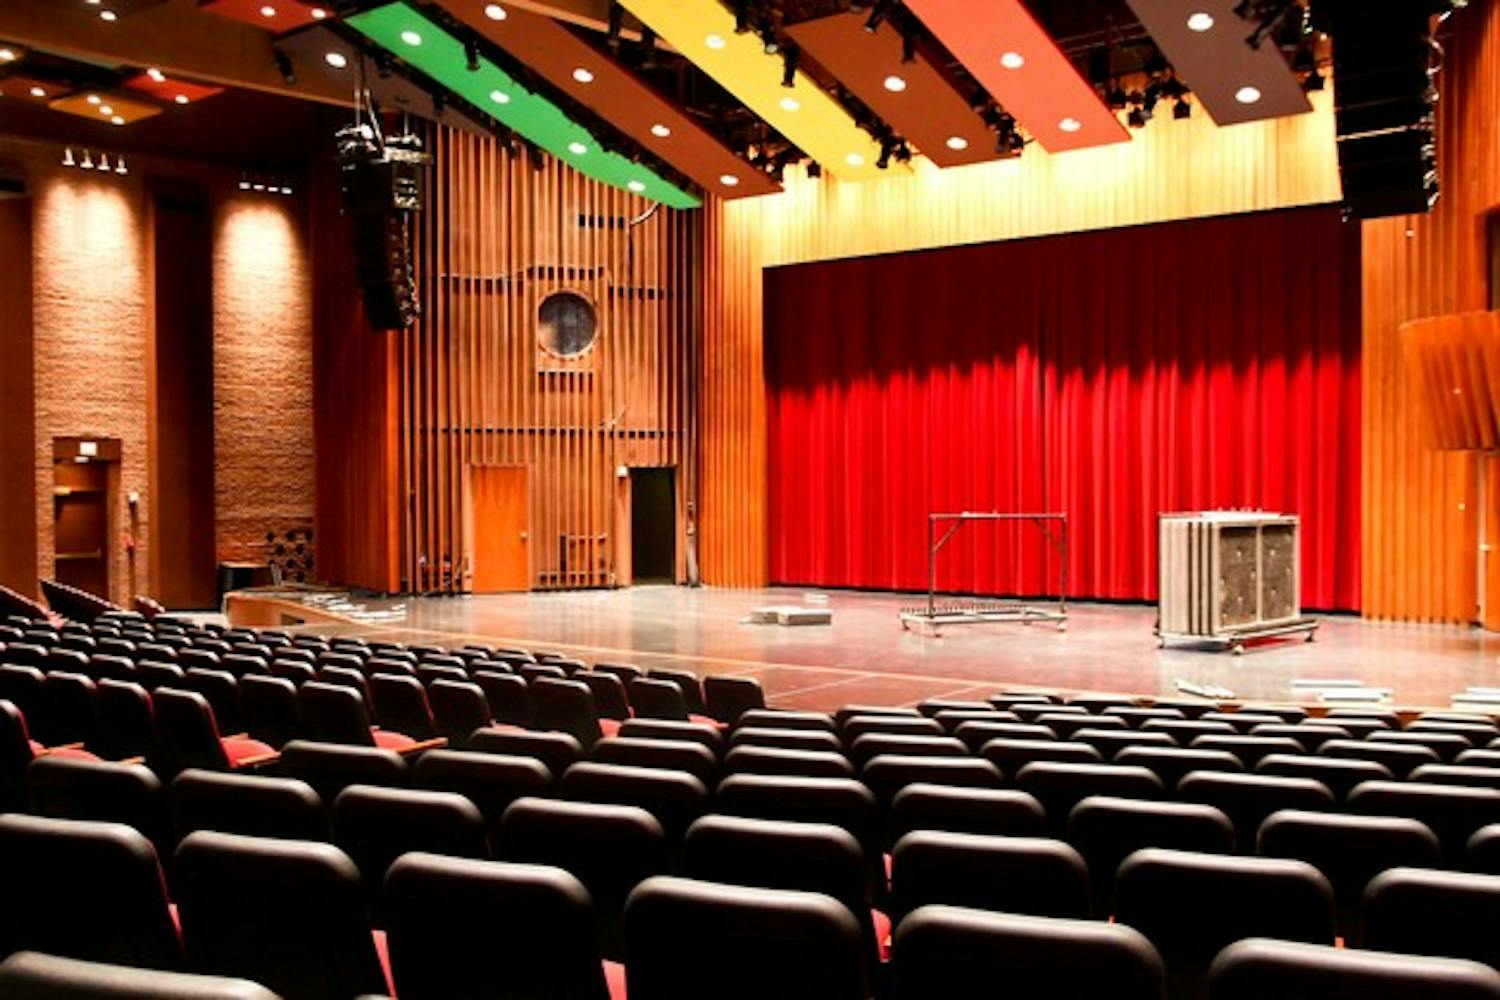 Spaulding Auditorium will be closed this summer due to nearby construction. As a result, the Hopkins Center for the Arts will adjust its programming.